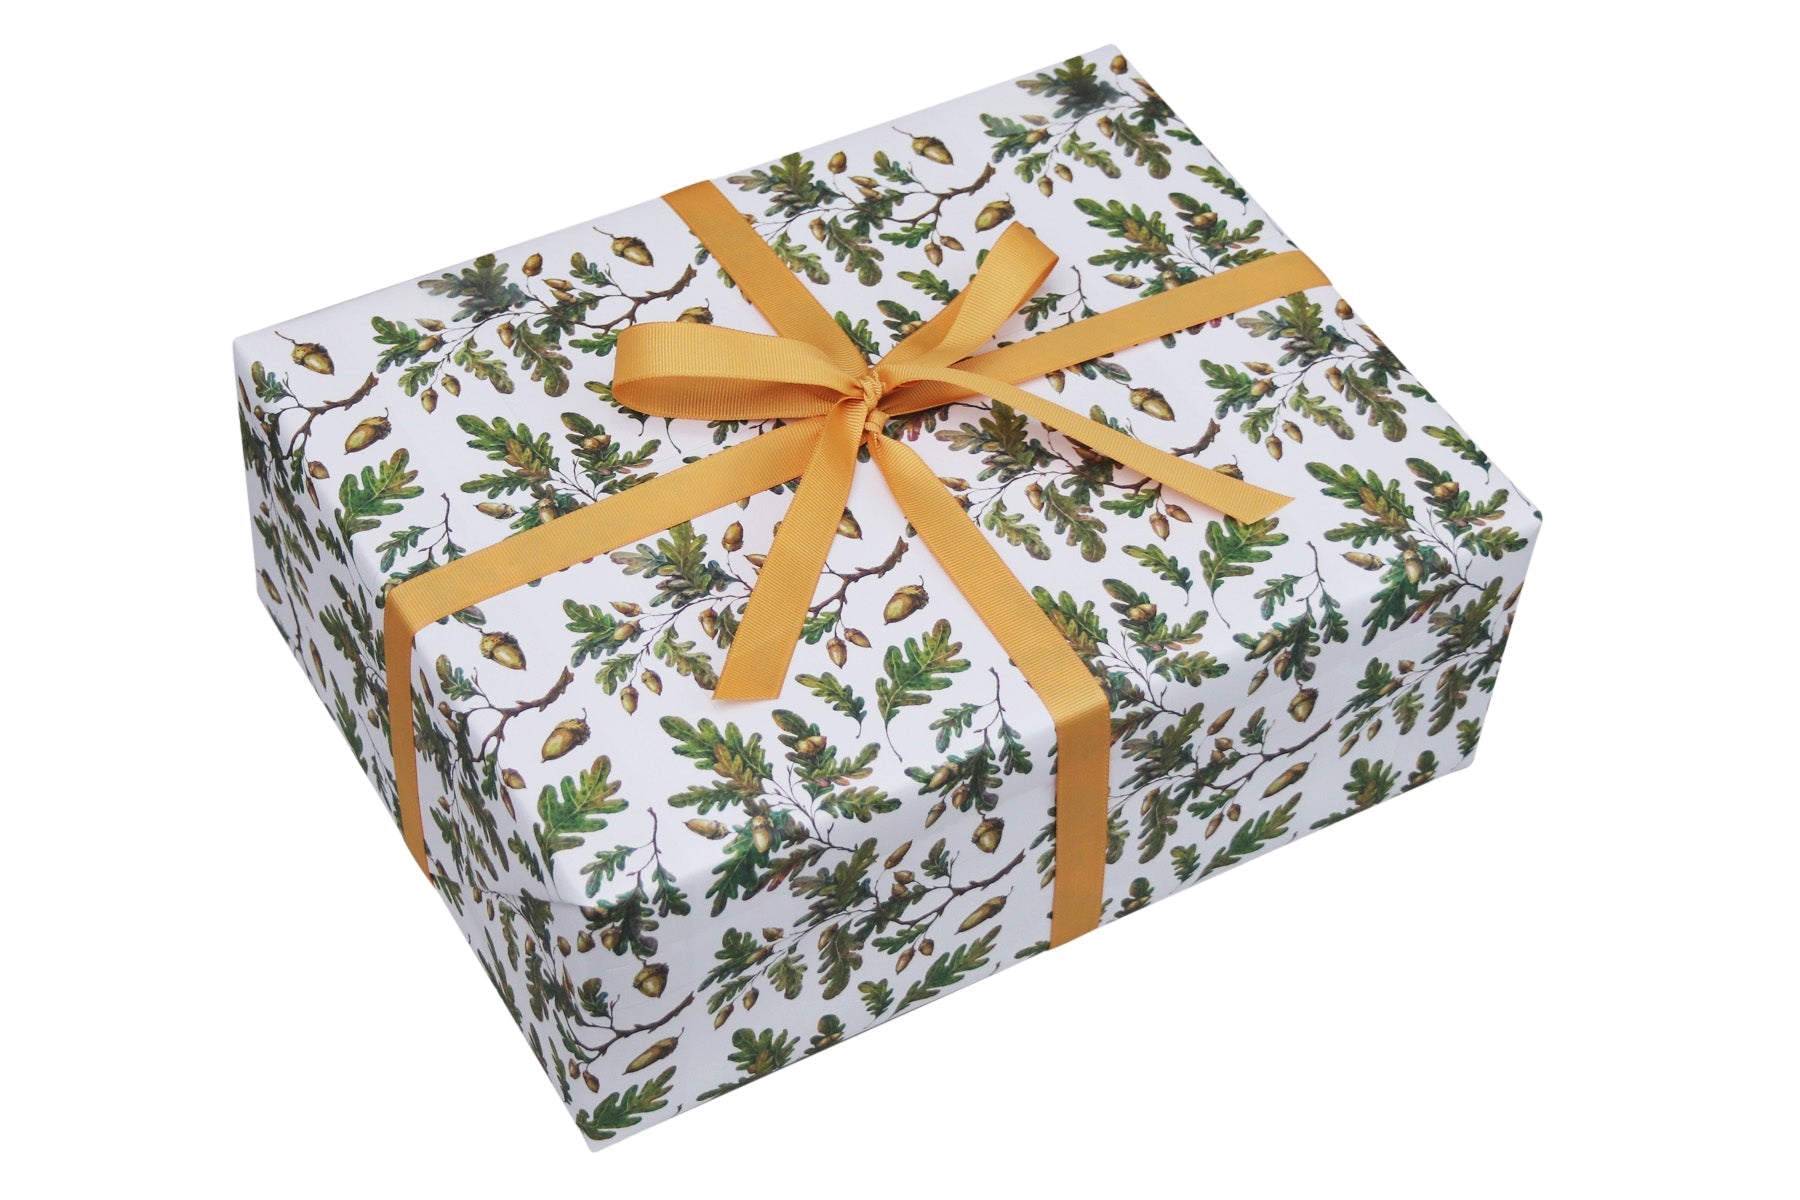 OAK LEAVES & ACORNS CHRISTMAS WRAPPING PAPER